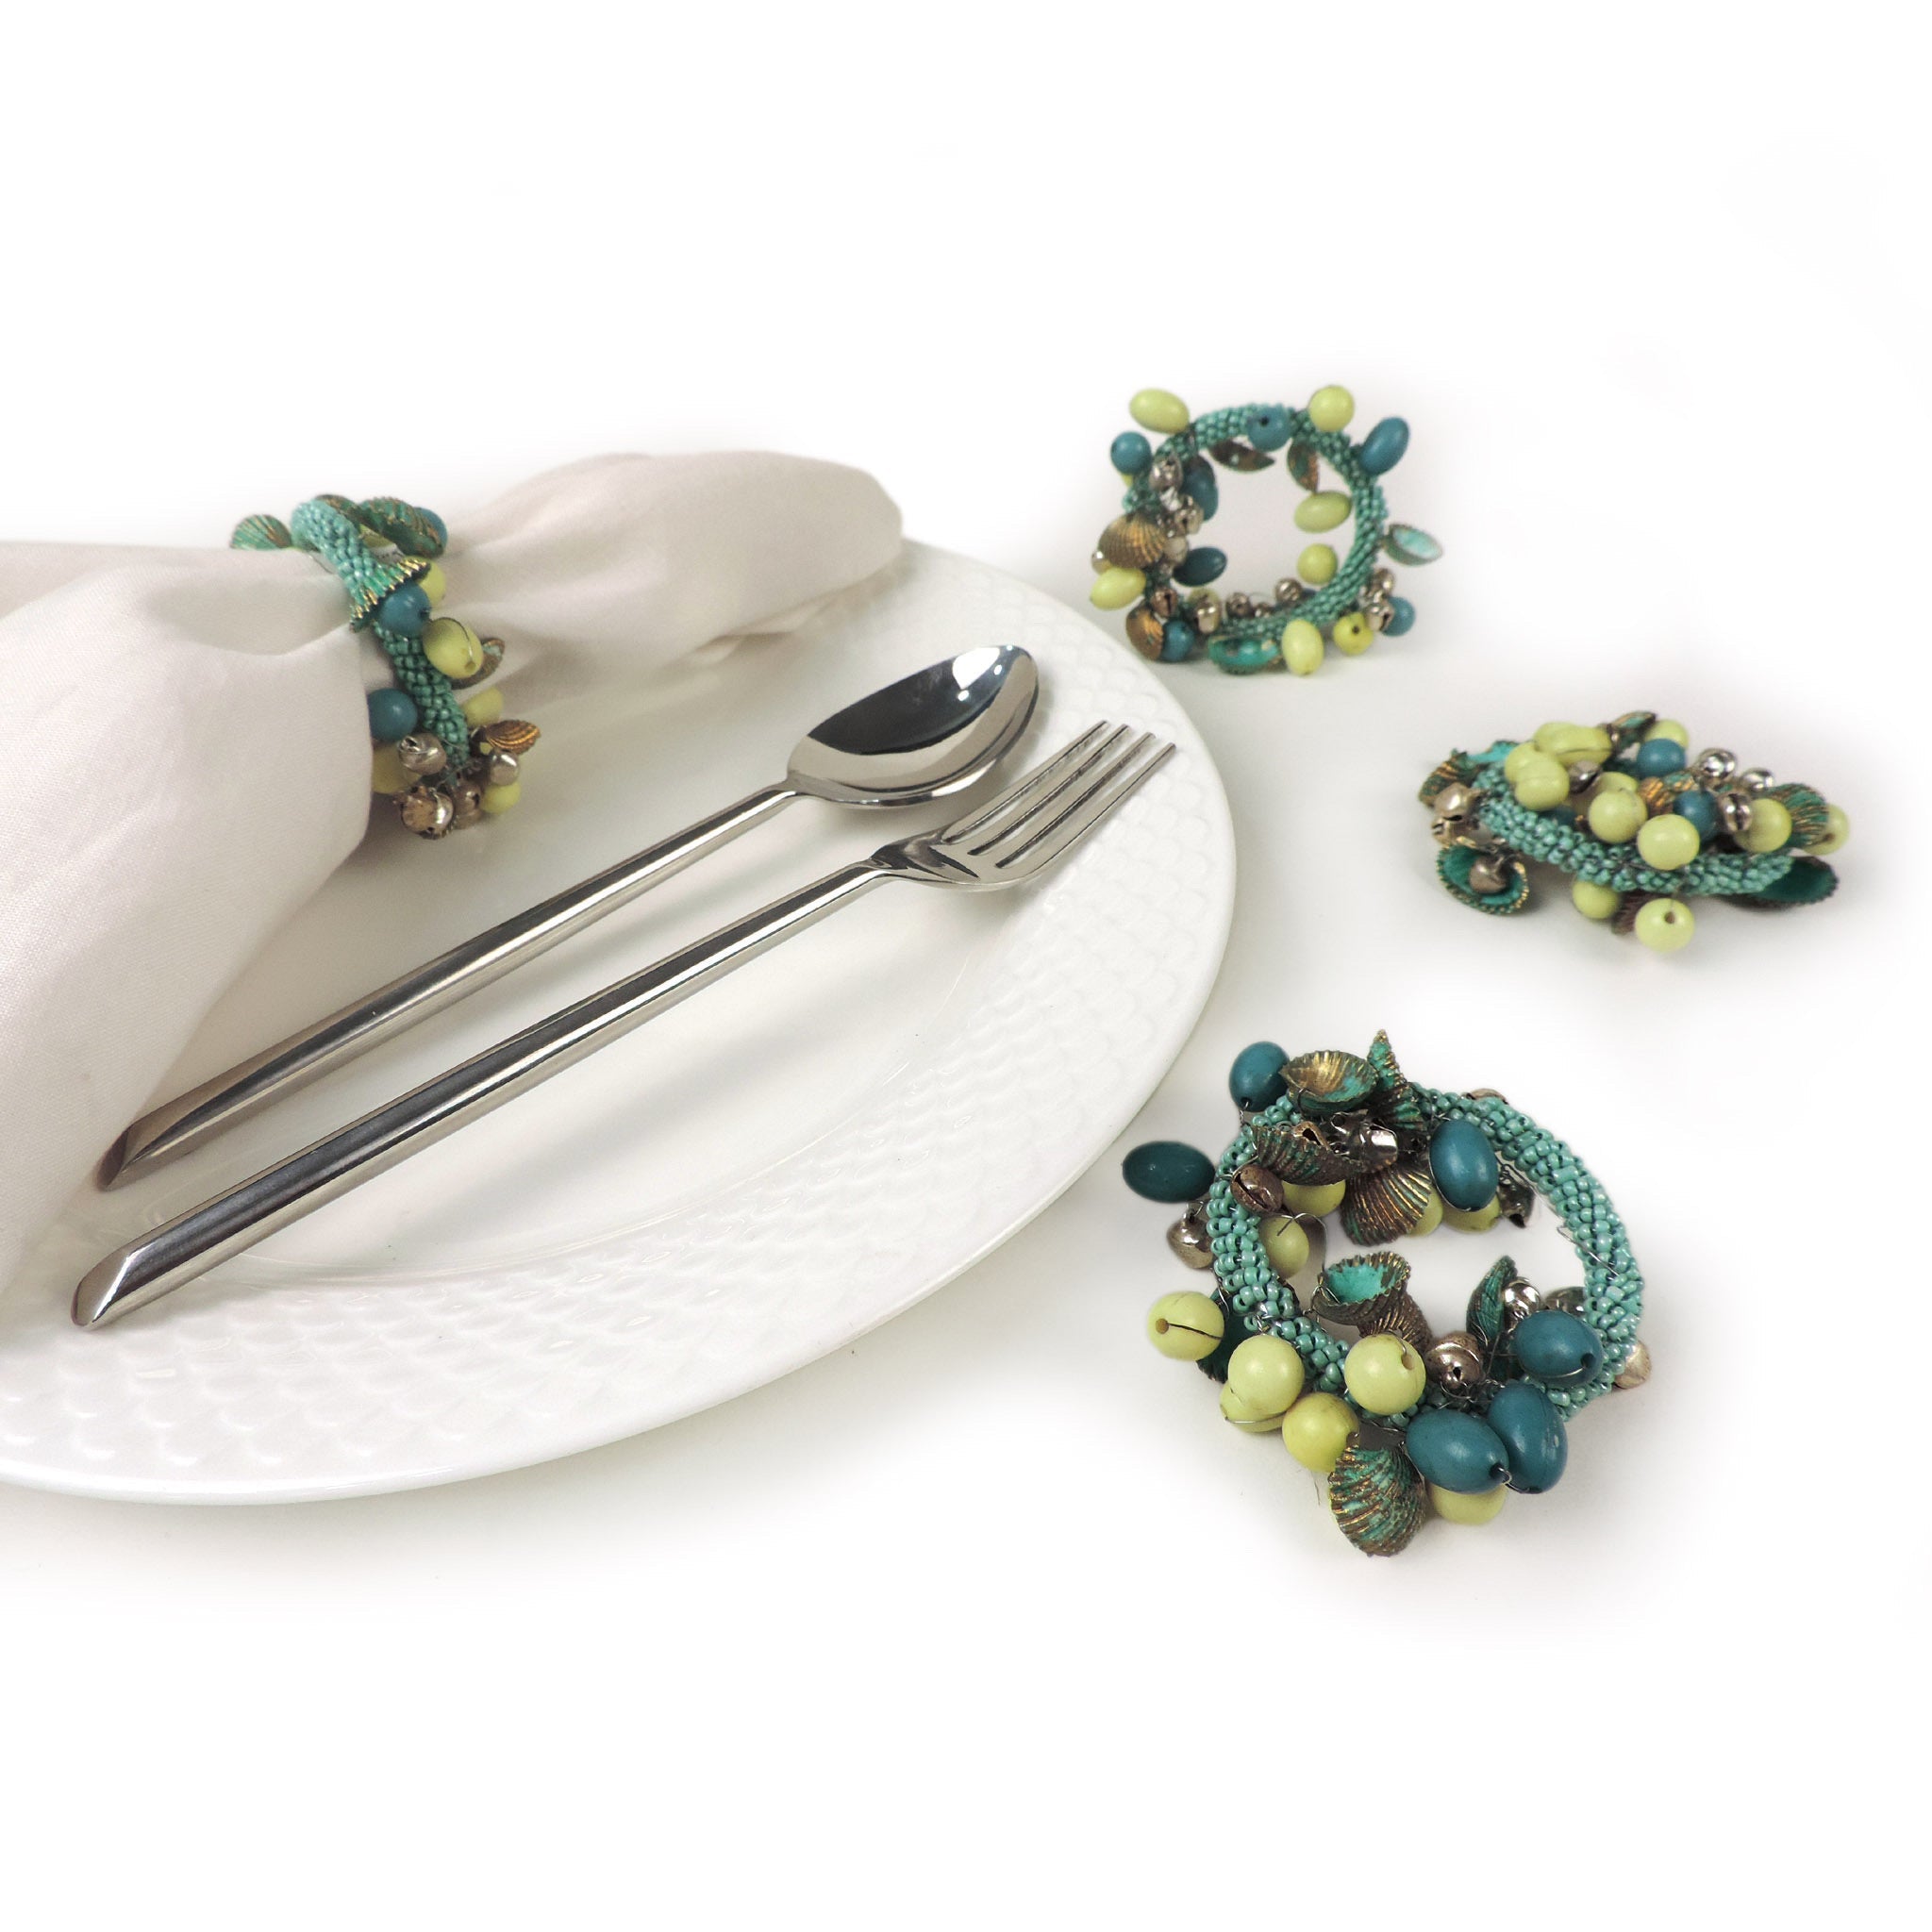 Boho Shell & Bead Napkin Ring<br>Set of 4<br>Color: Turquoise